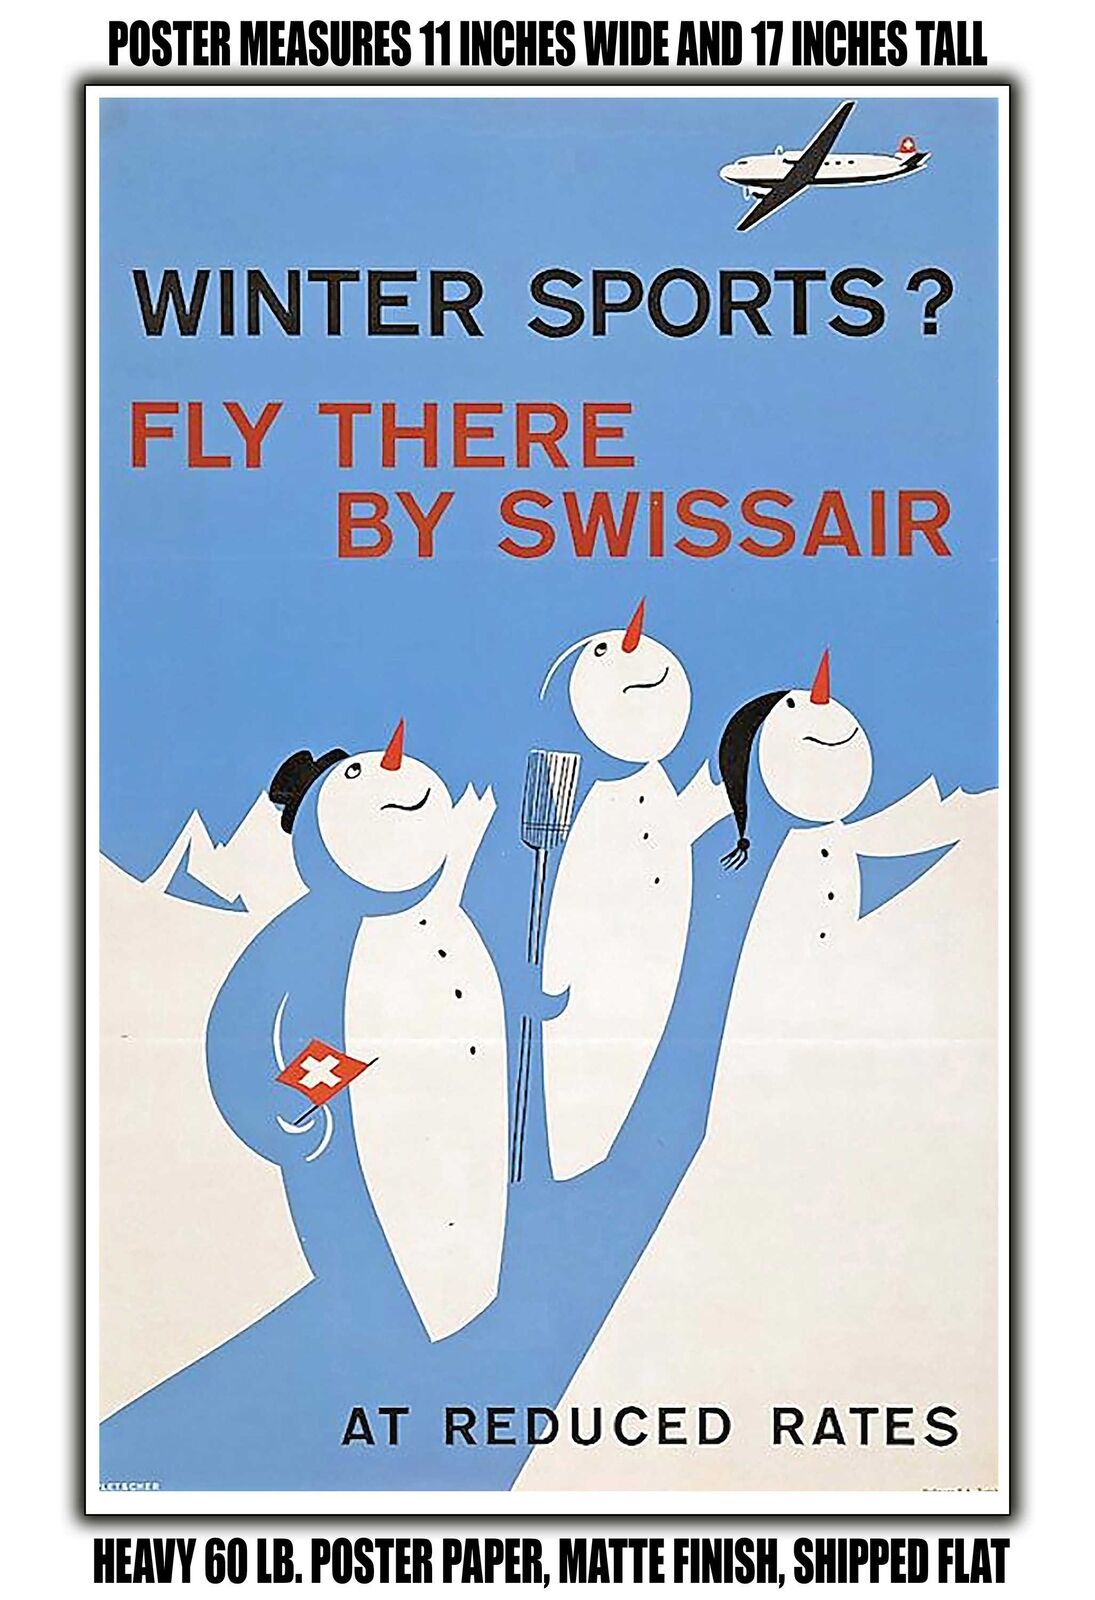 11x17 POSTER - 1953 Winter Sports Fly There by Swissair 2